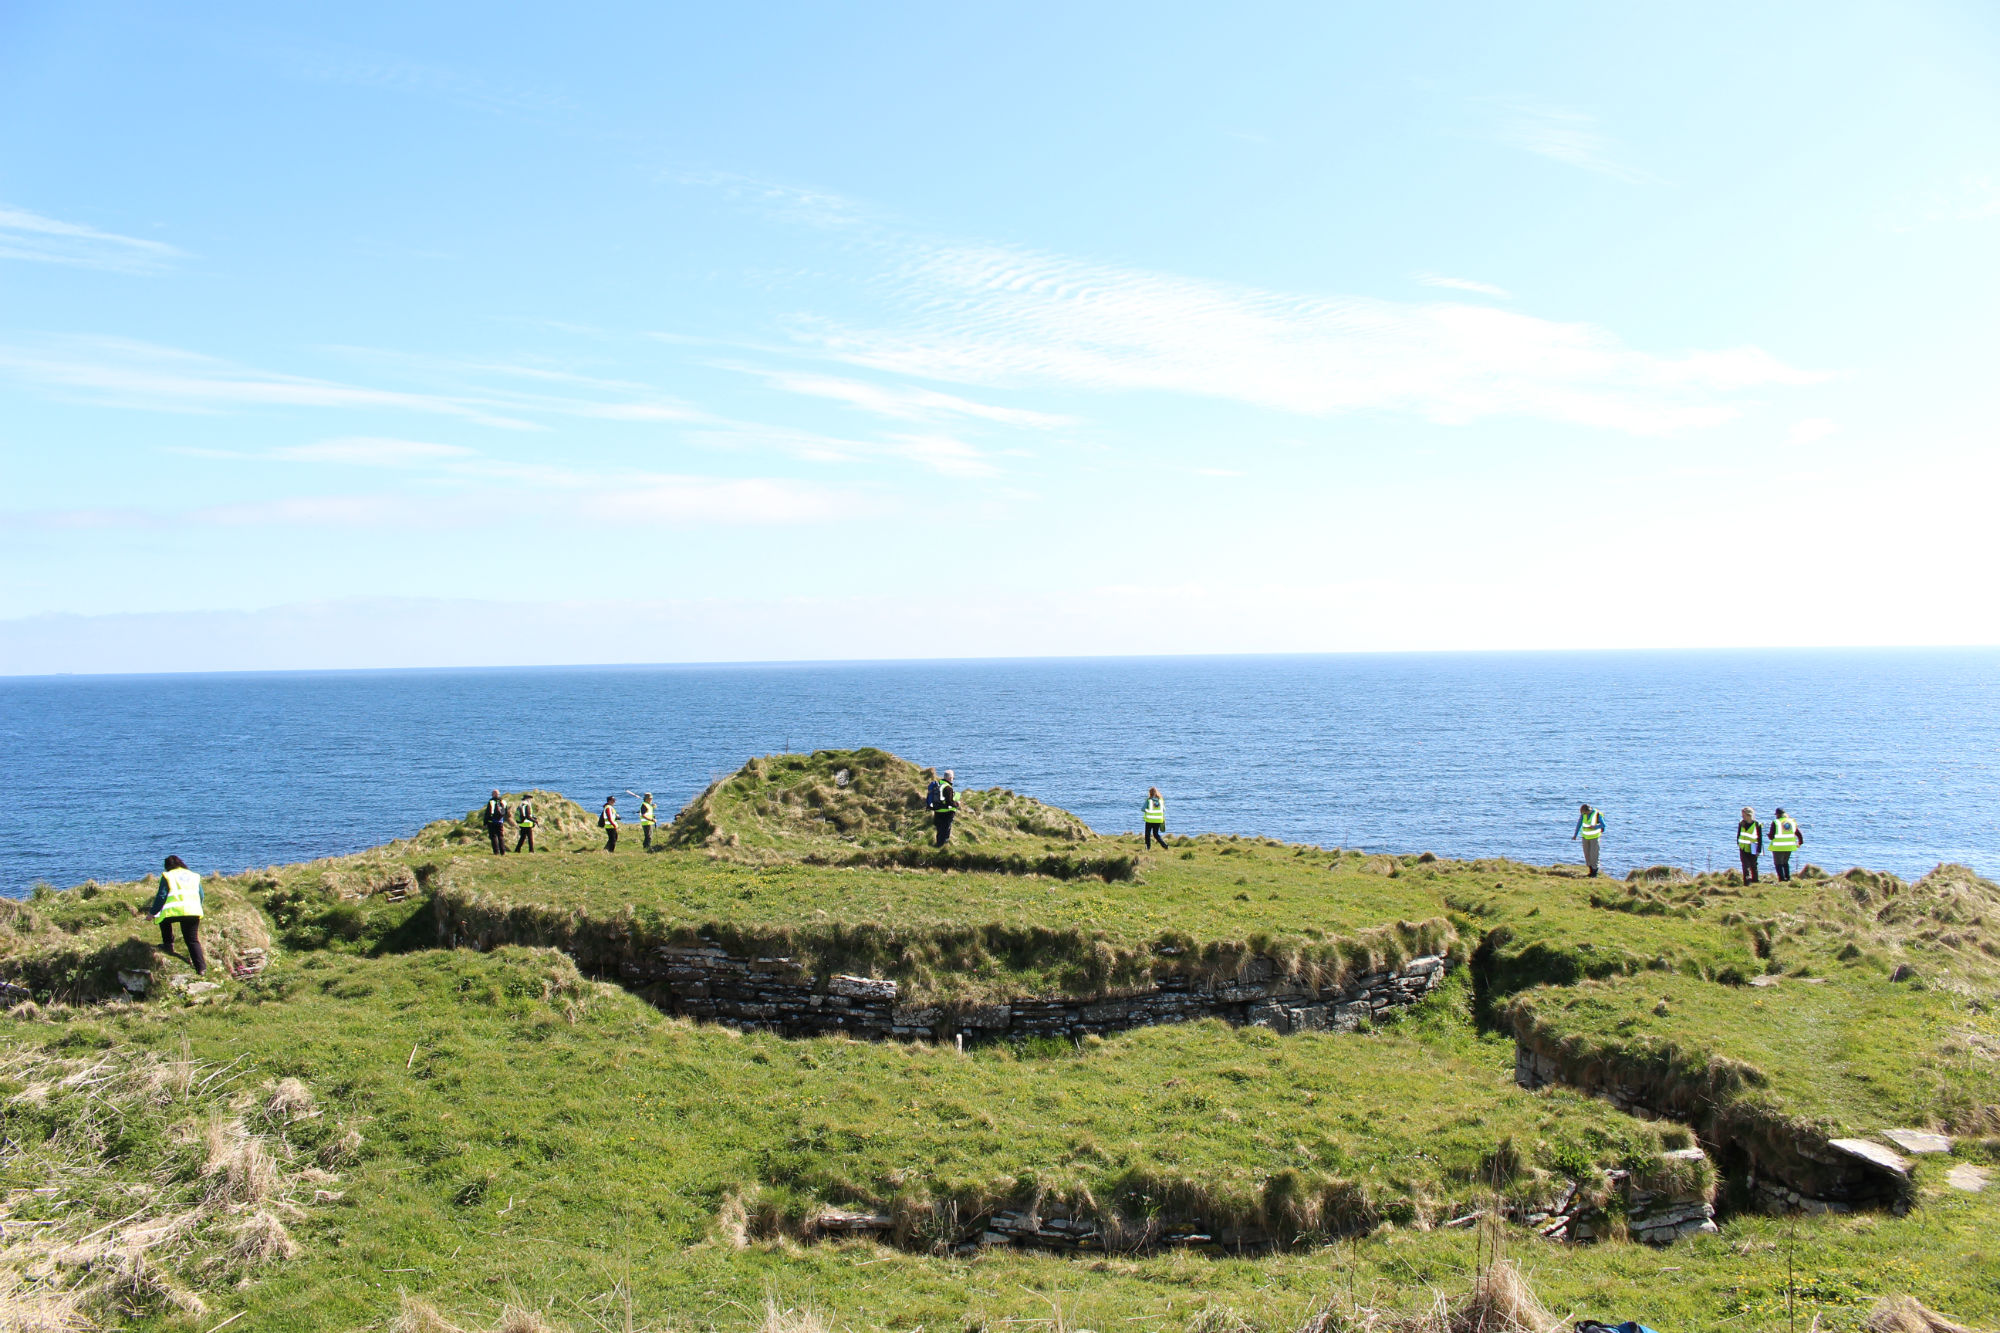 General view of broch and settlement